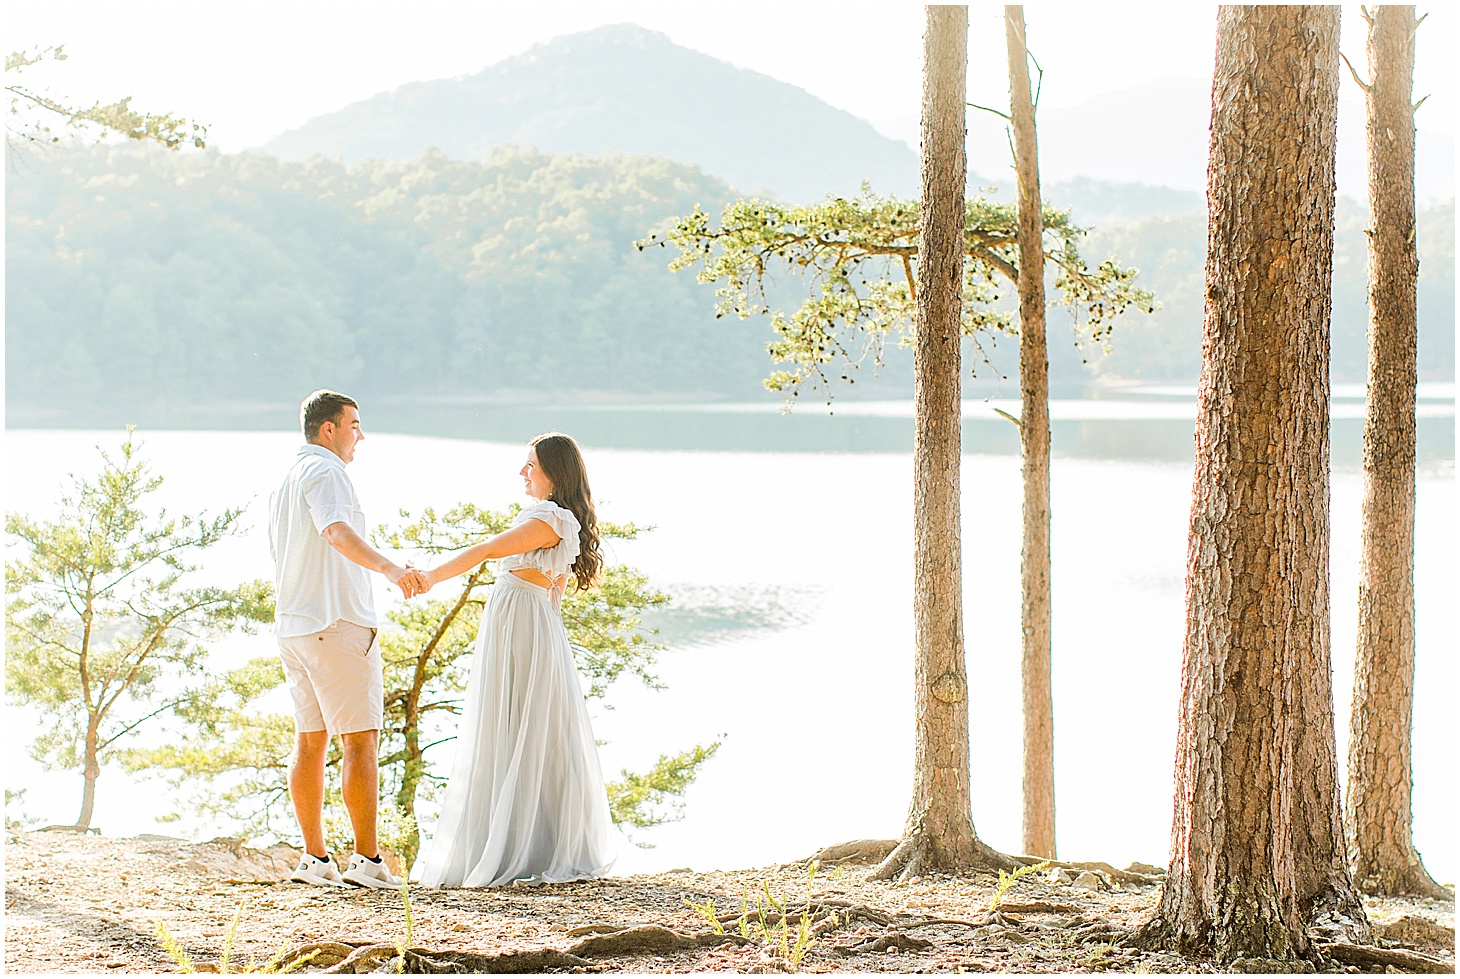 carvinscove_roanokeengagementsession_virginiaweddingphotographer_vaweddingphotographer_photo_0073.jpg